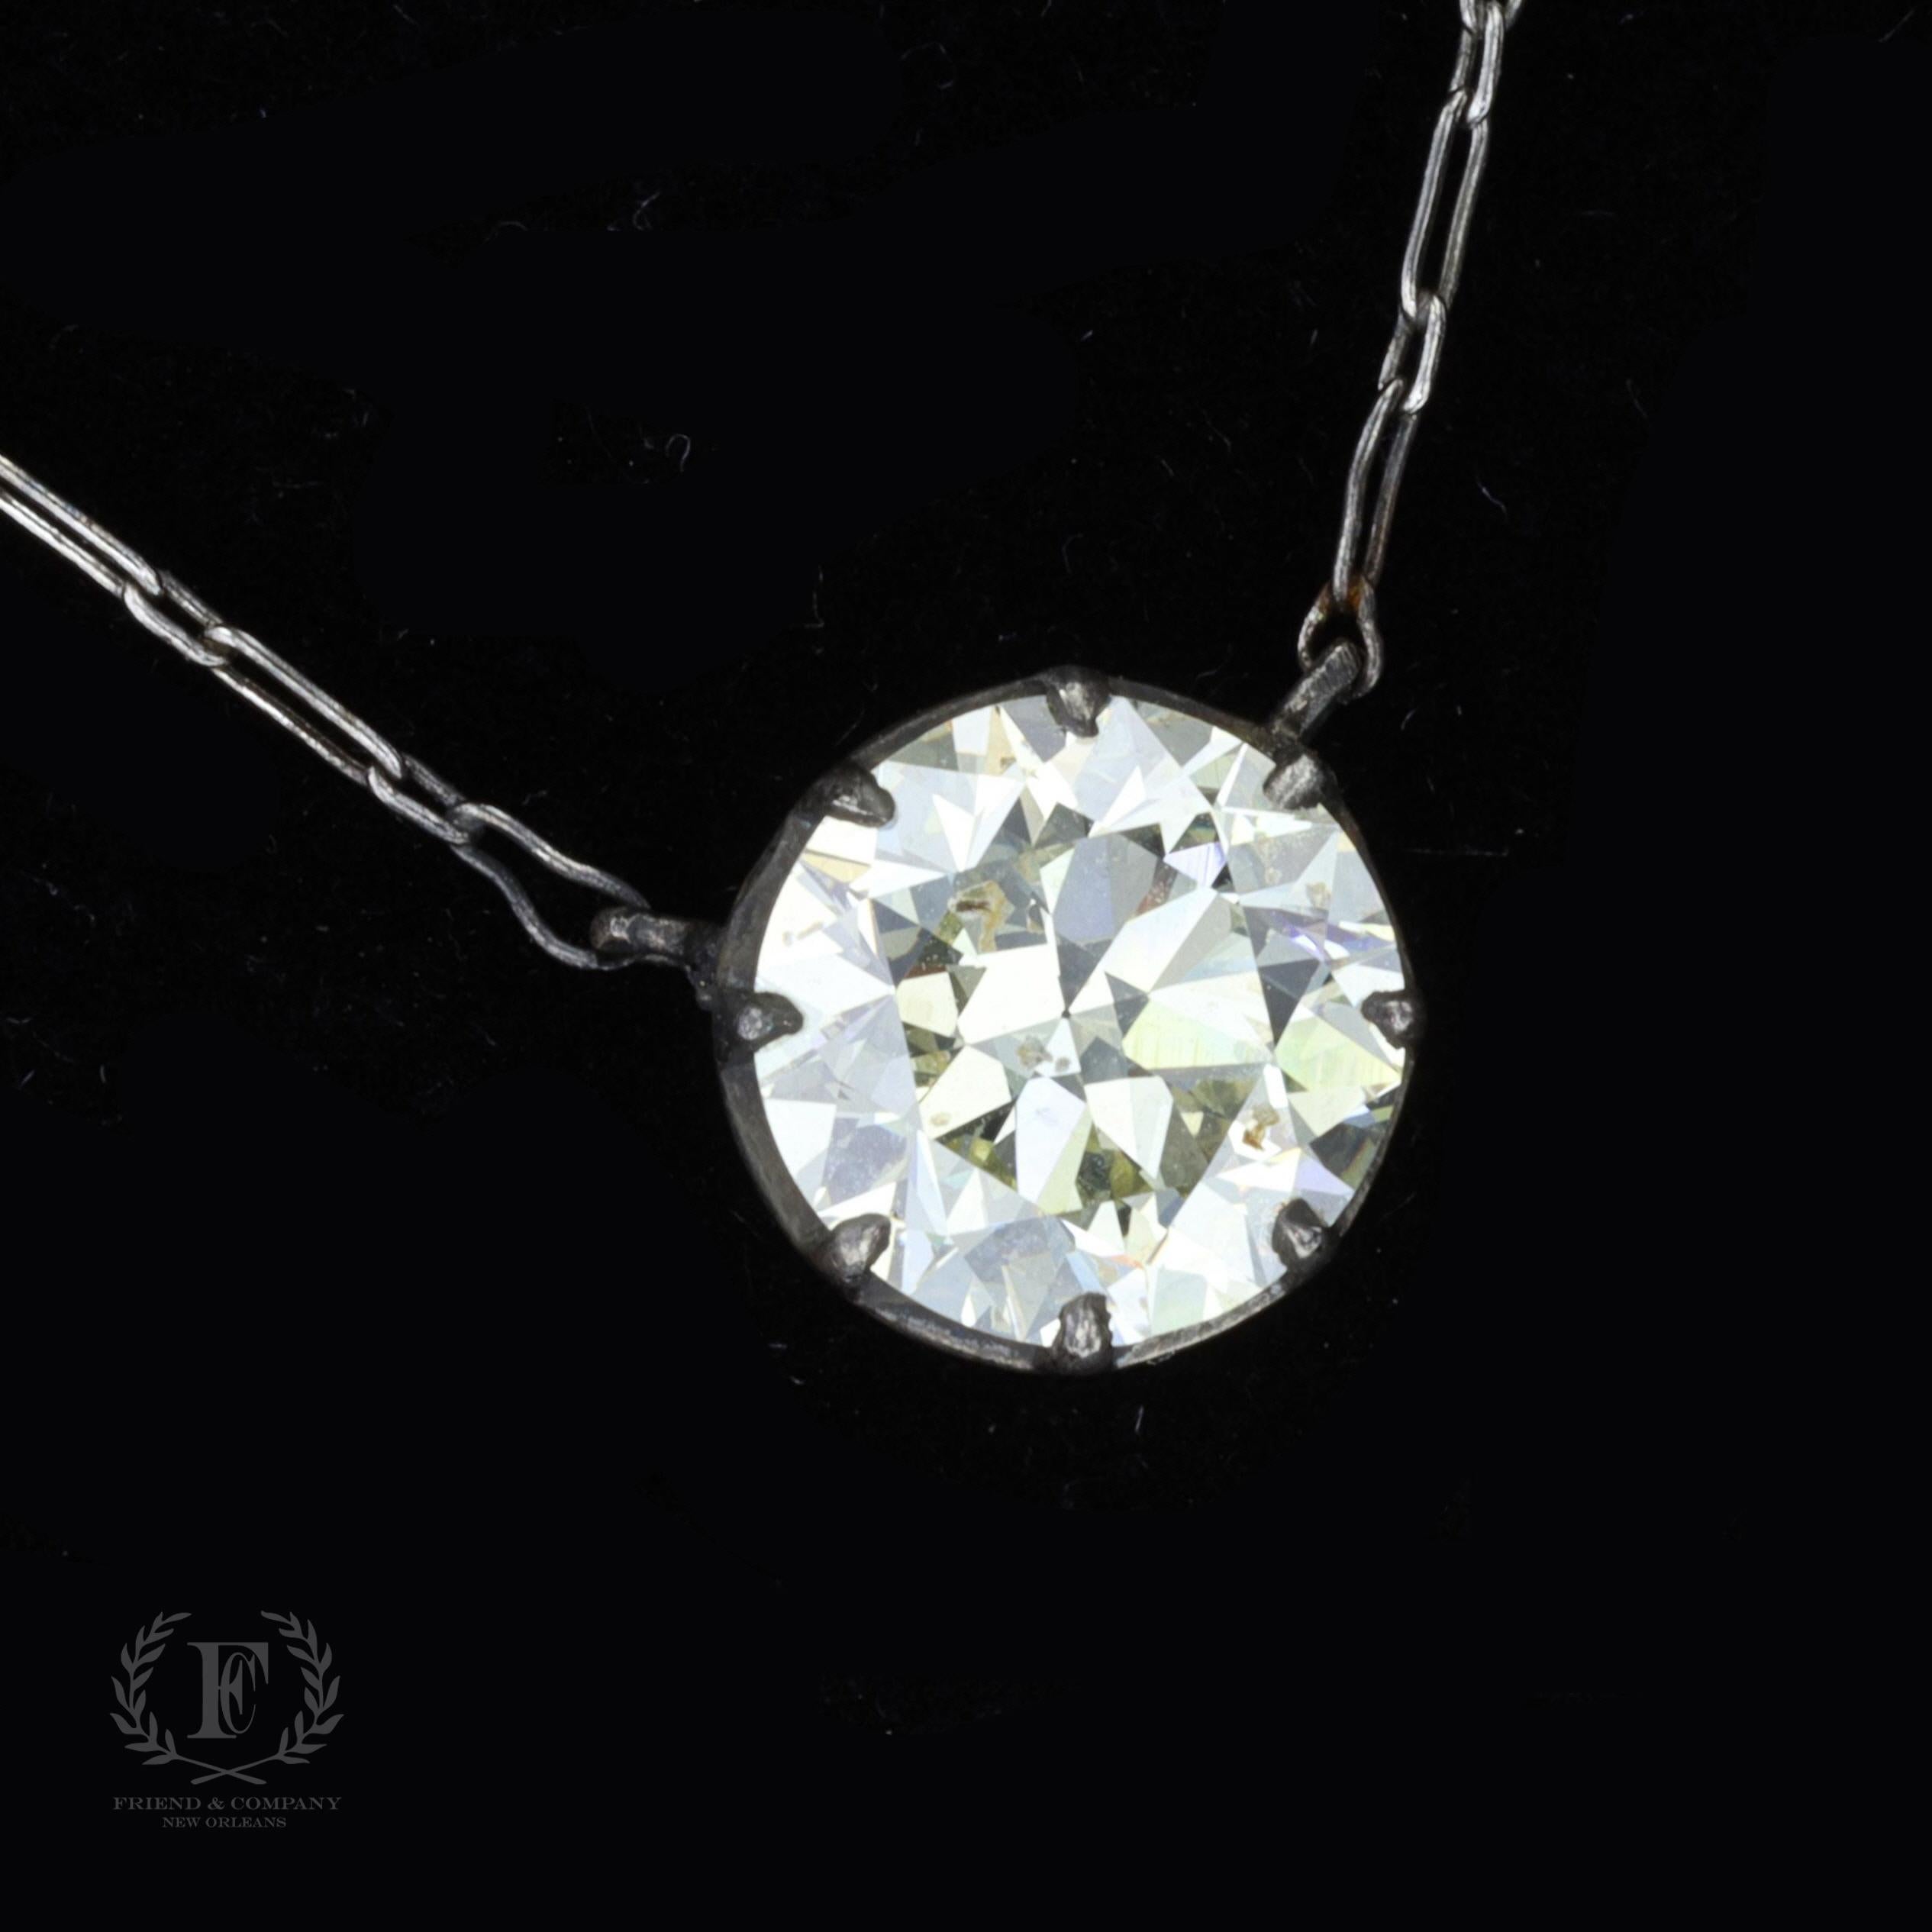 This necklace is a piece to cherish for a lifetime. This bezel set diamond pendant contains one Old European diamond with a total weight of 3.40 carats. The pendant is set on a platinum chain that measures 18 inches in length.